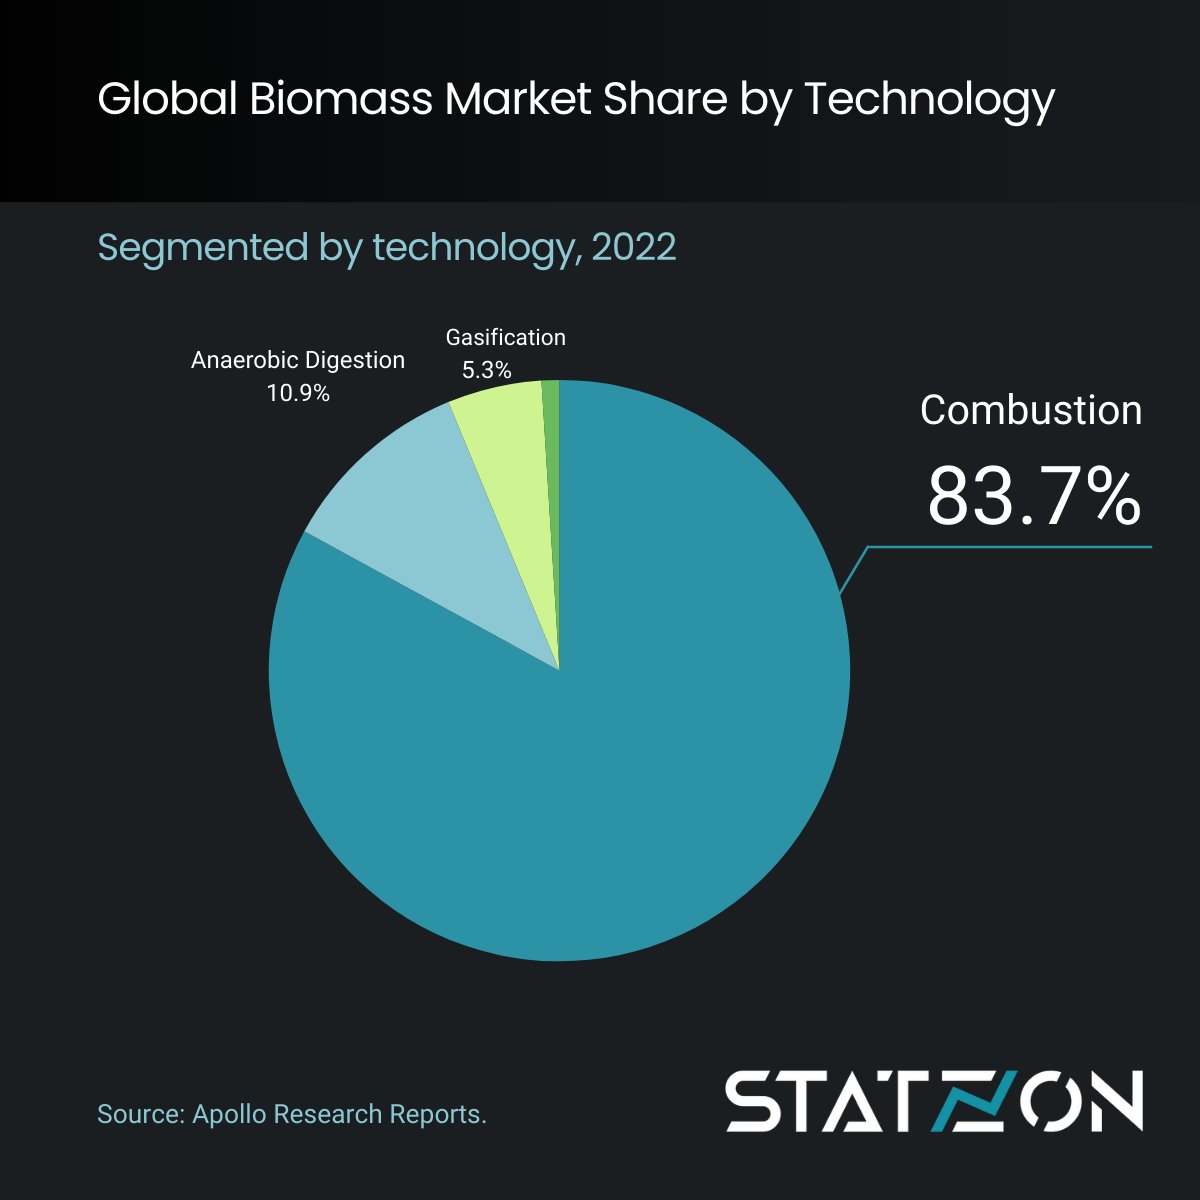 Have you checked the energy article about Biomass? Biomass to Account for 18% of the Energy Market eu1.hubs.ly/H08B3jw0

#biomass #bioenergy #netzeroemissions #nze #energymarket